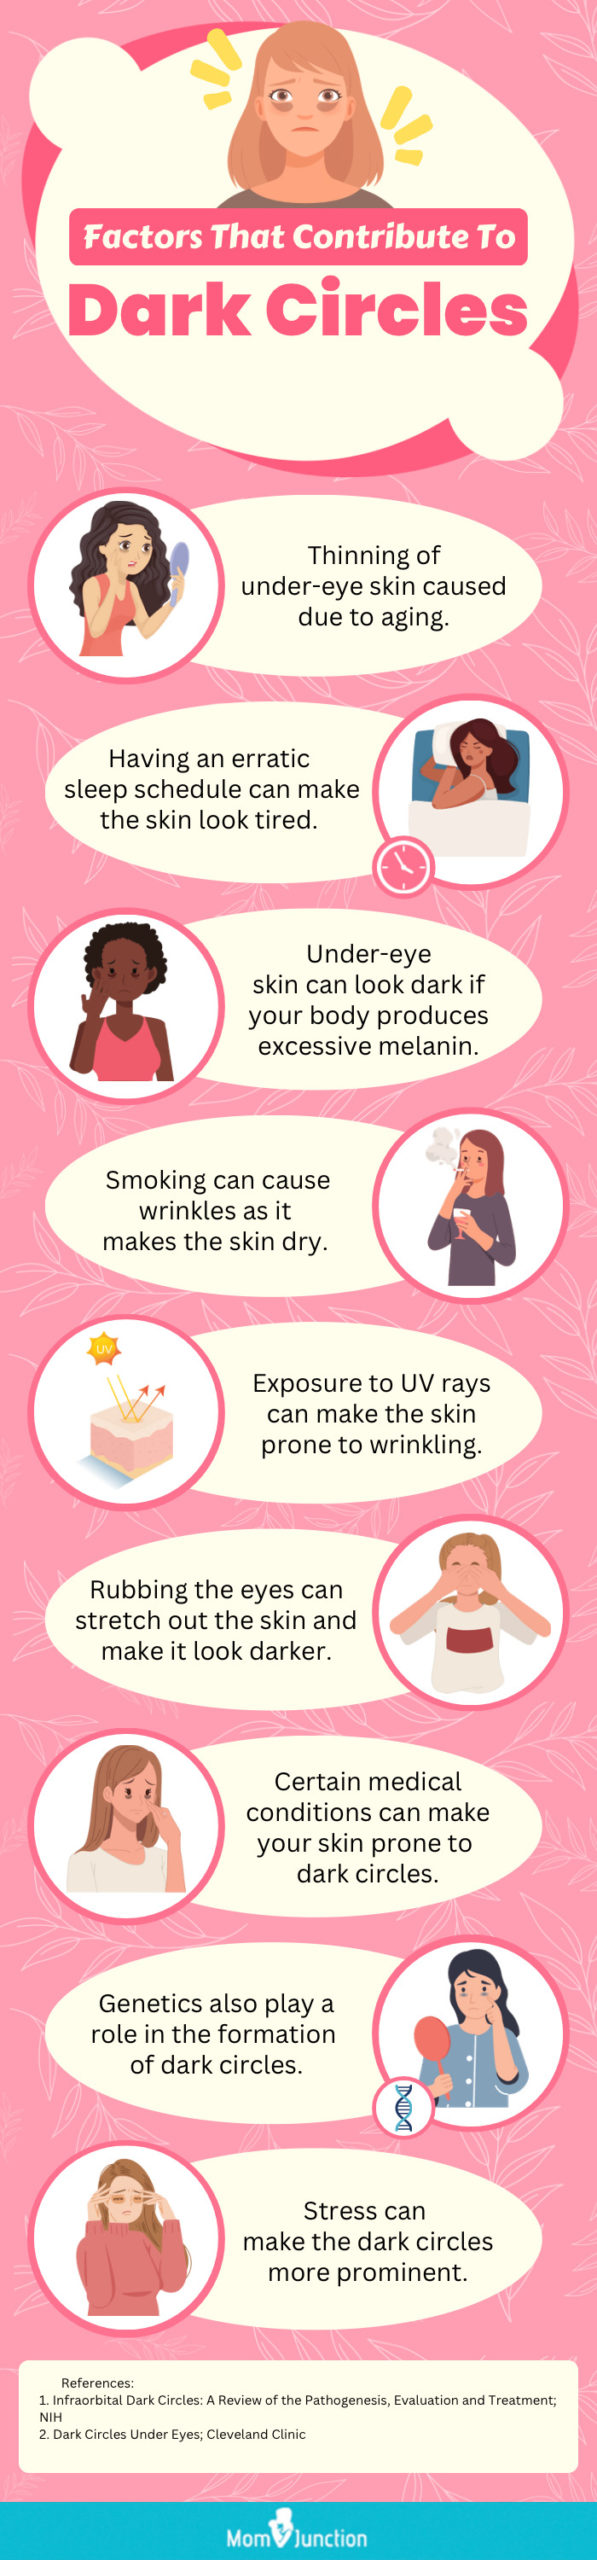 Factors That Contribute To Dark Circles (Infographic)